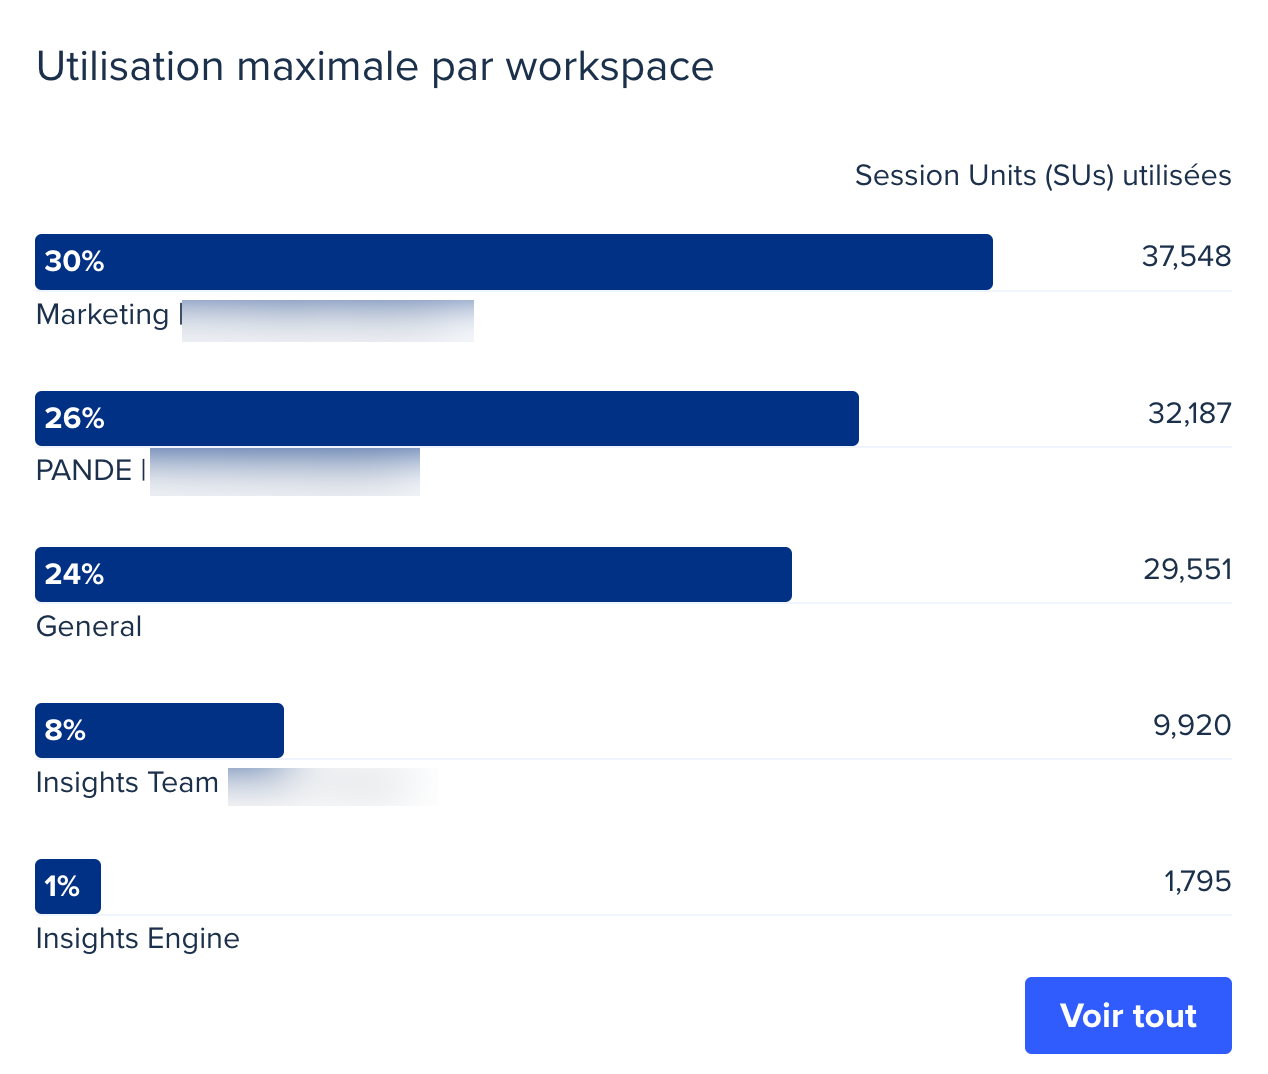 top usage by workspace.png